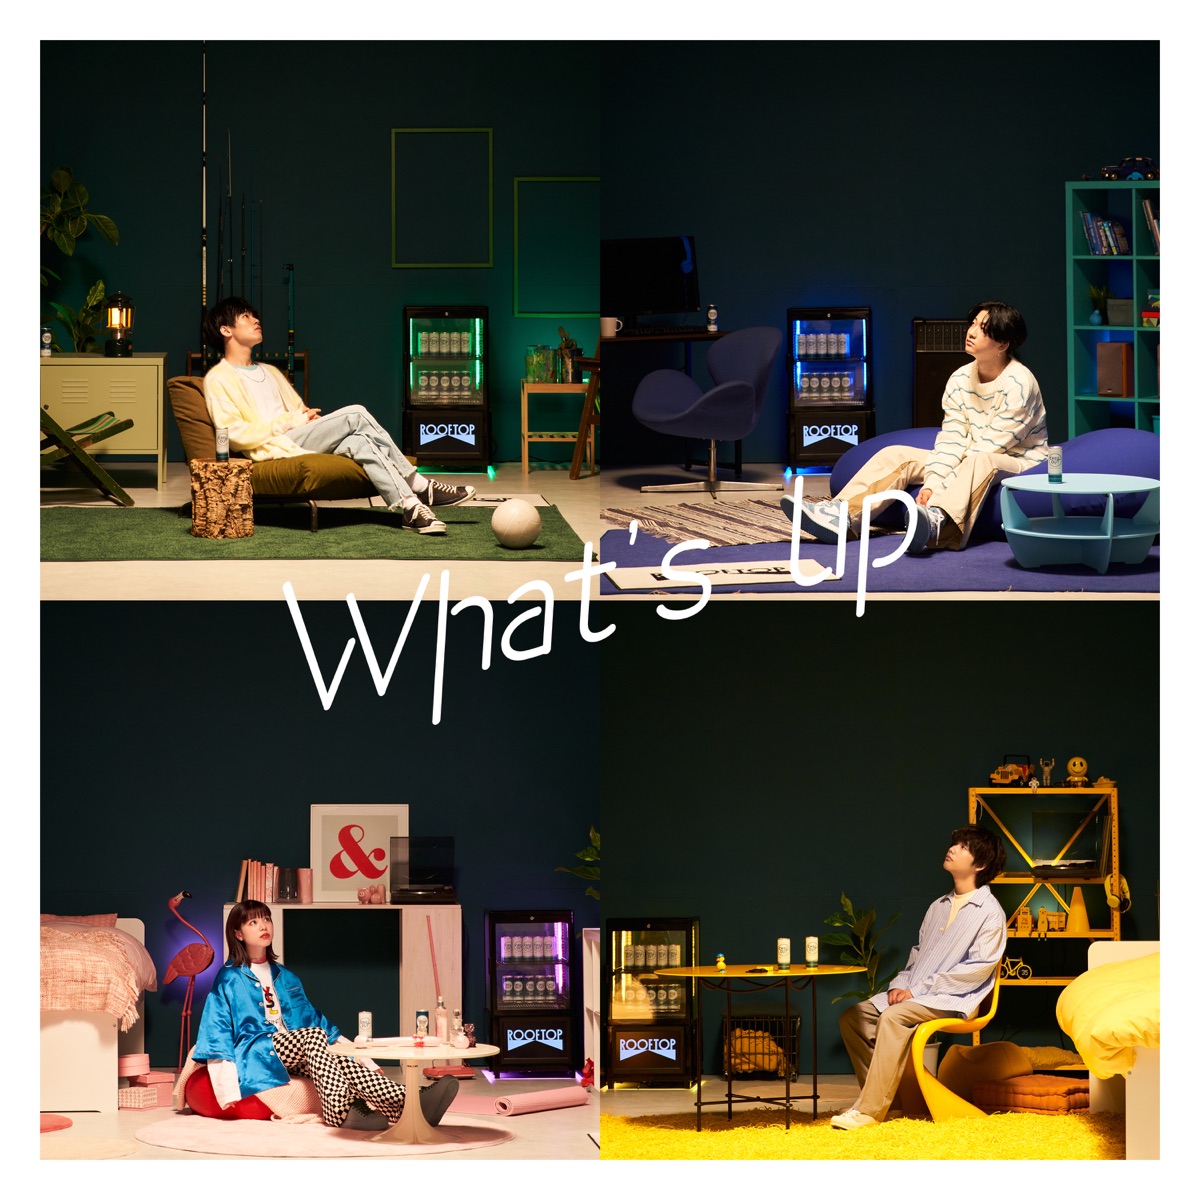 Cover art for『Rinne, Kubotakai, asmi, ANATSUME - What's up』from the release『What's up』